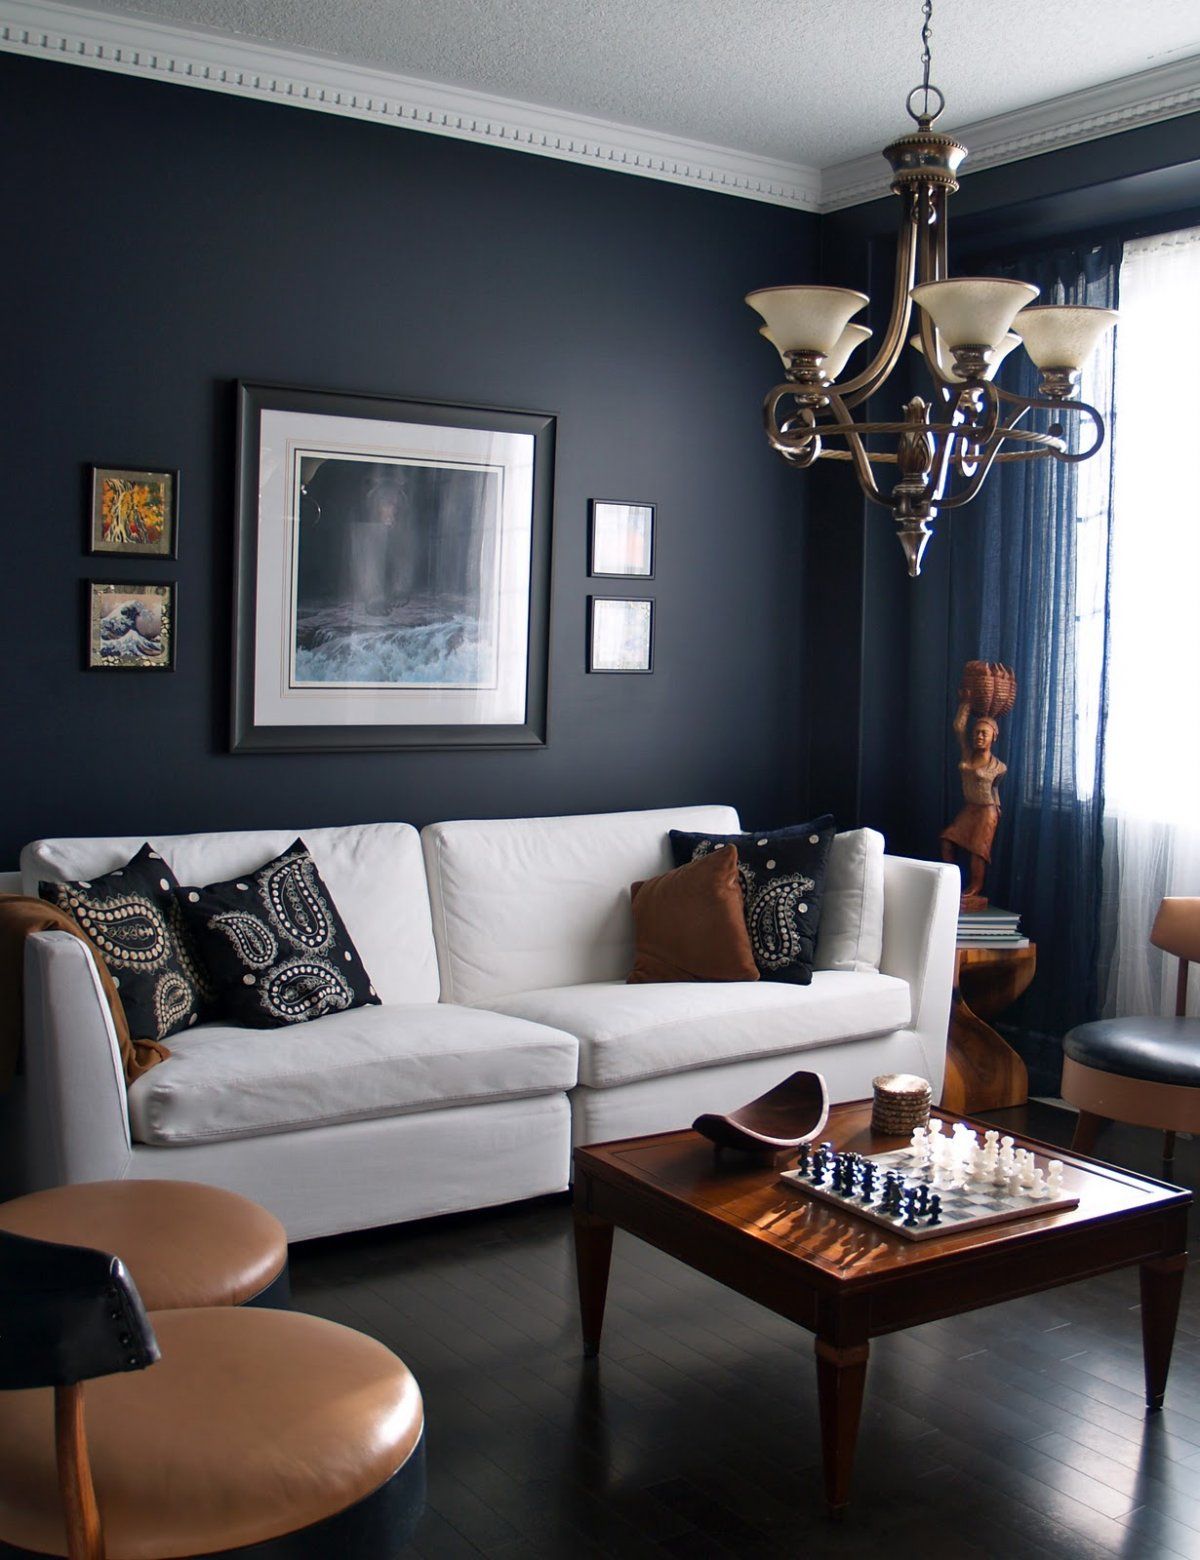 How to Decorate with Dark Colors